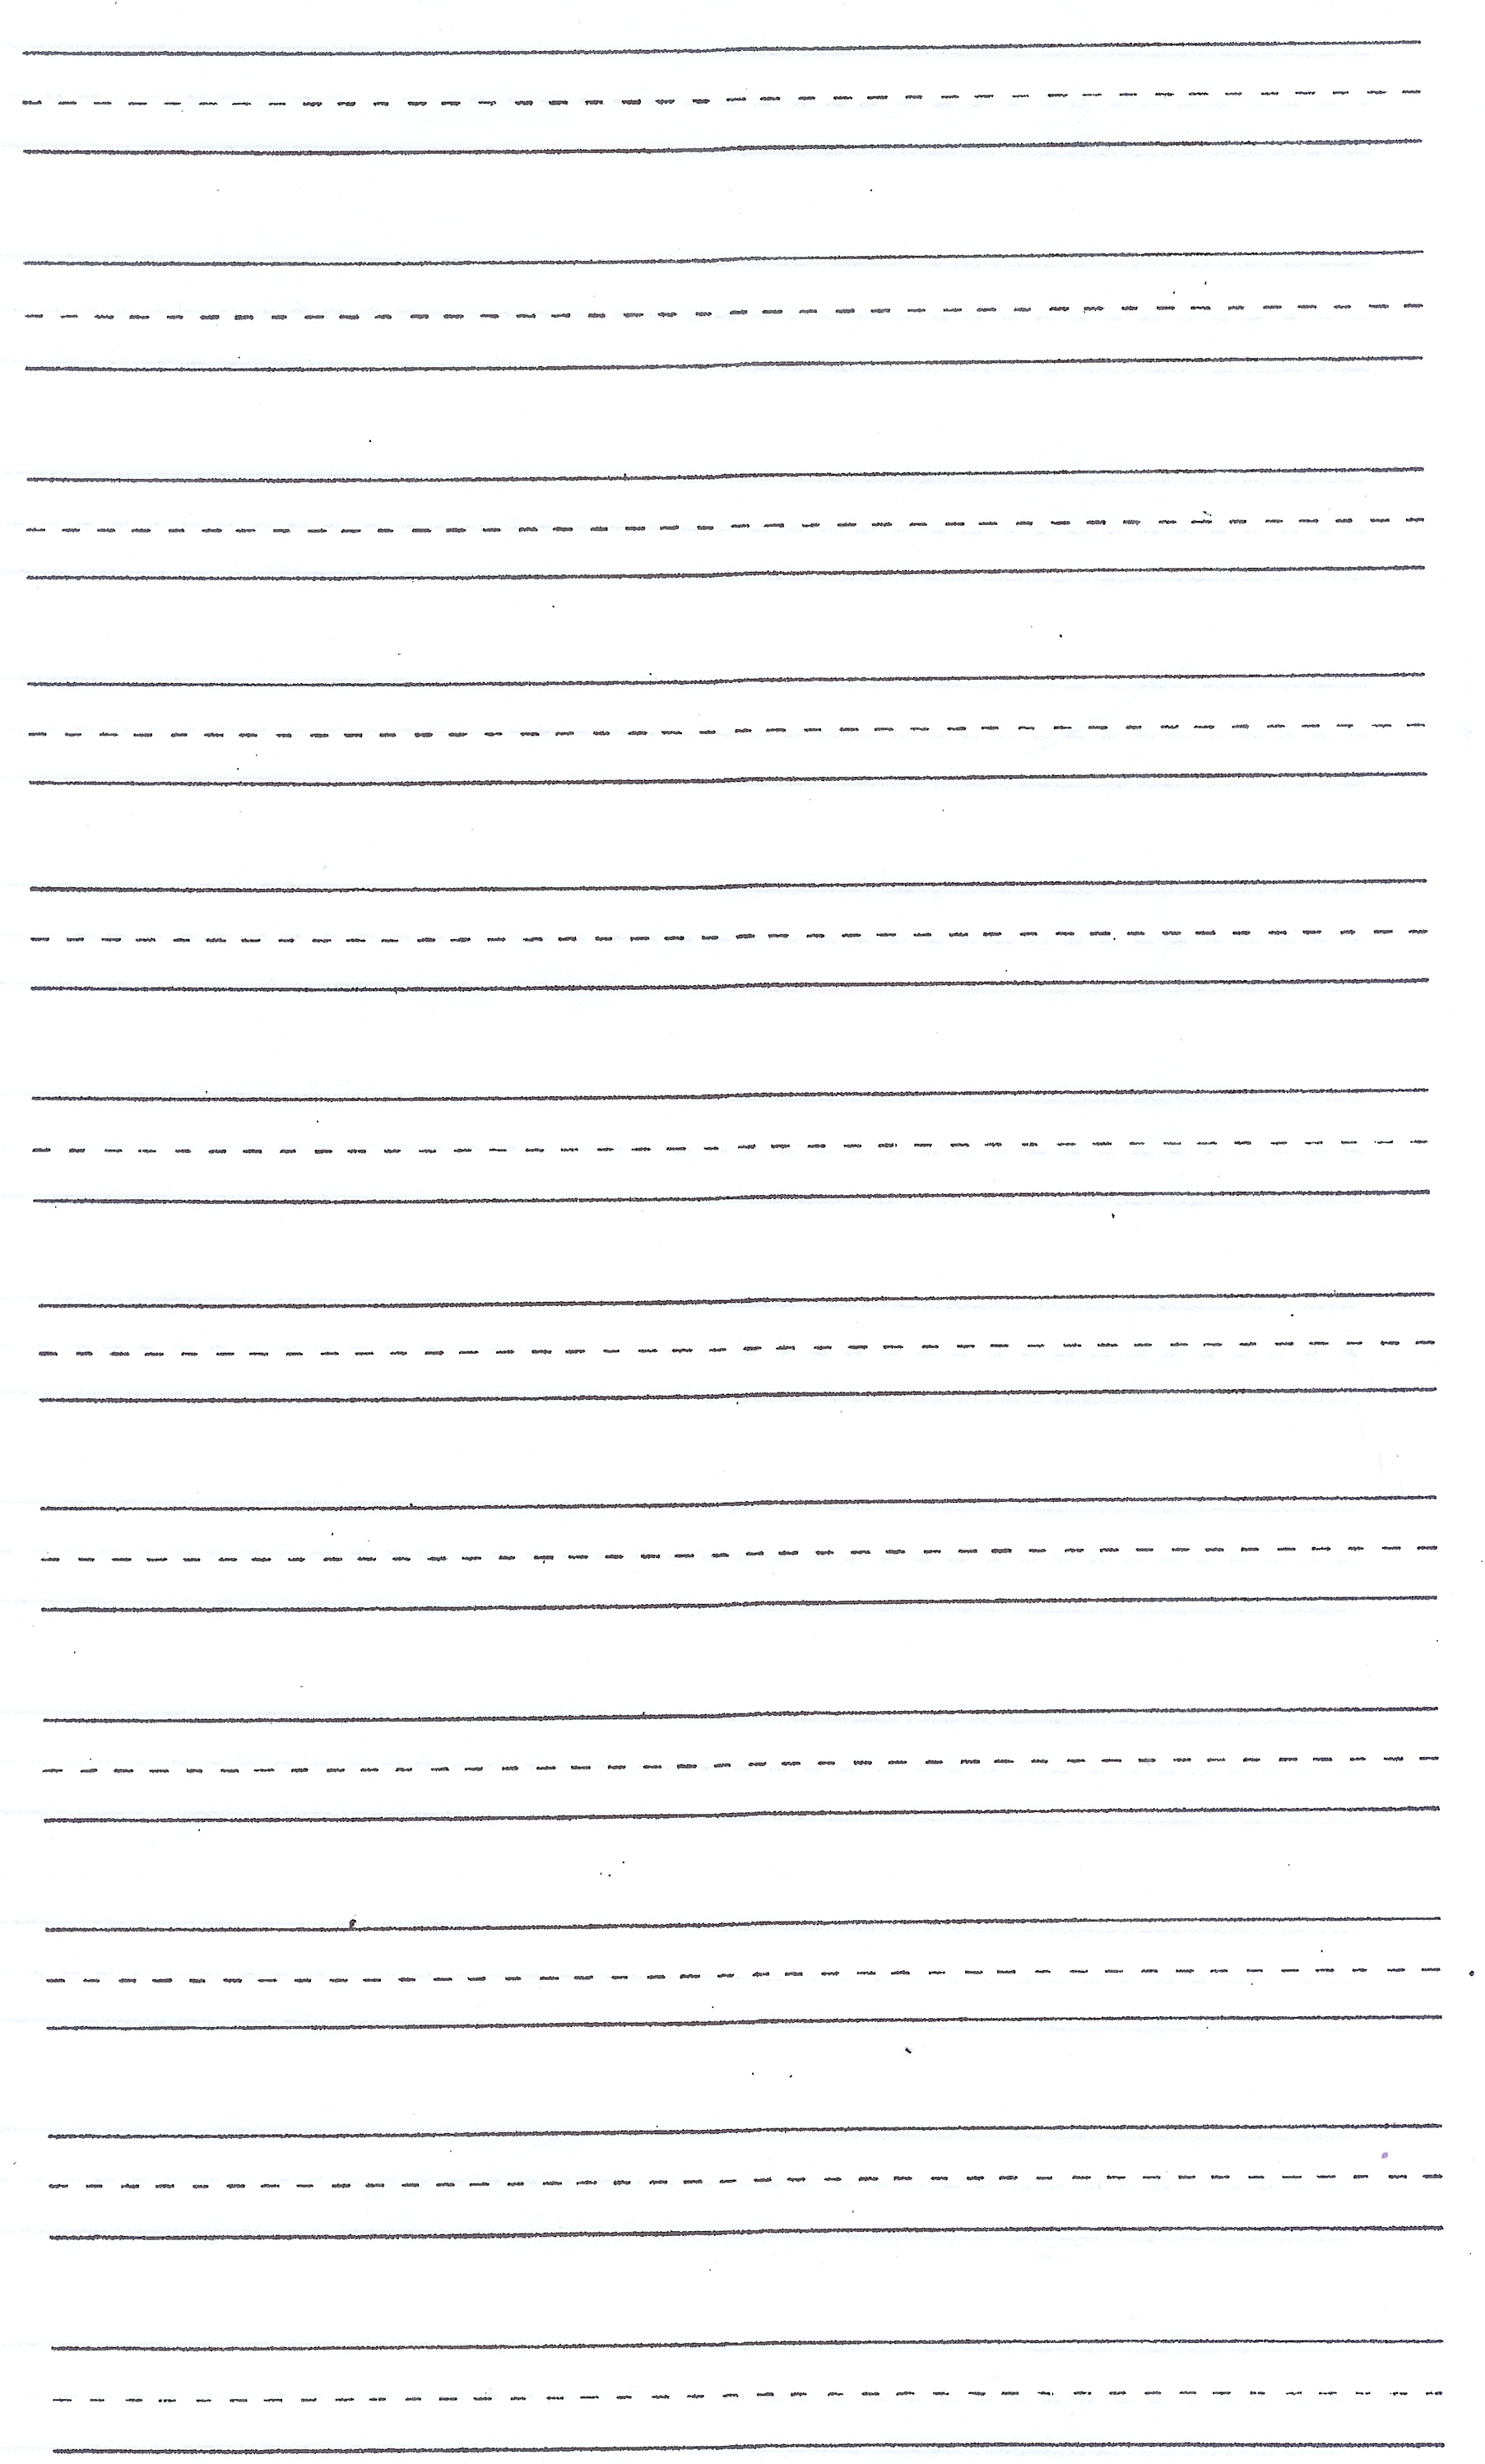 8-best-images-of-printable-writing-paper-template-writing-paper-template-printable-first